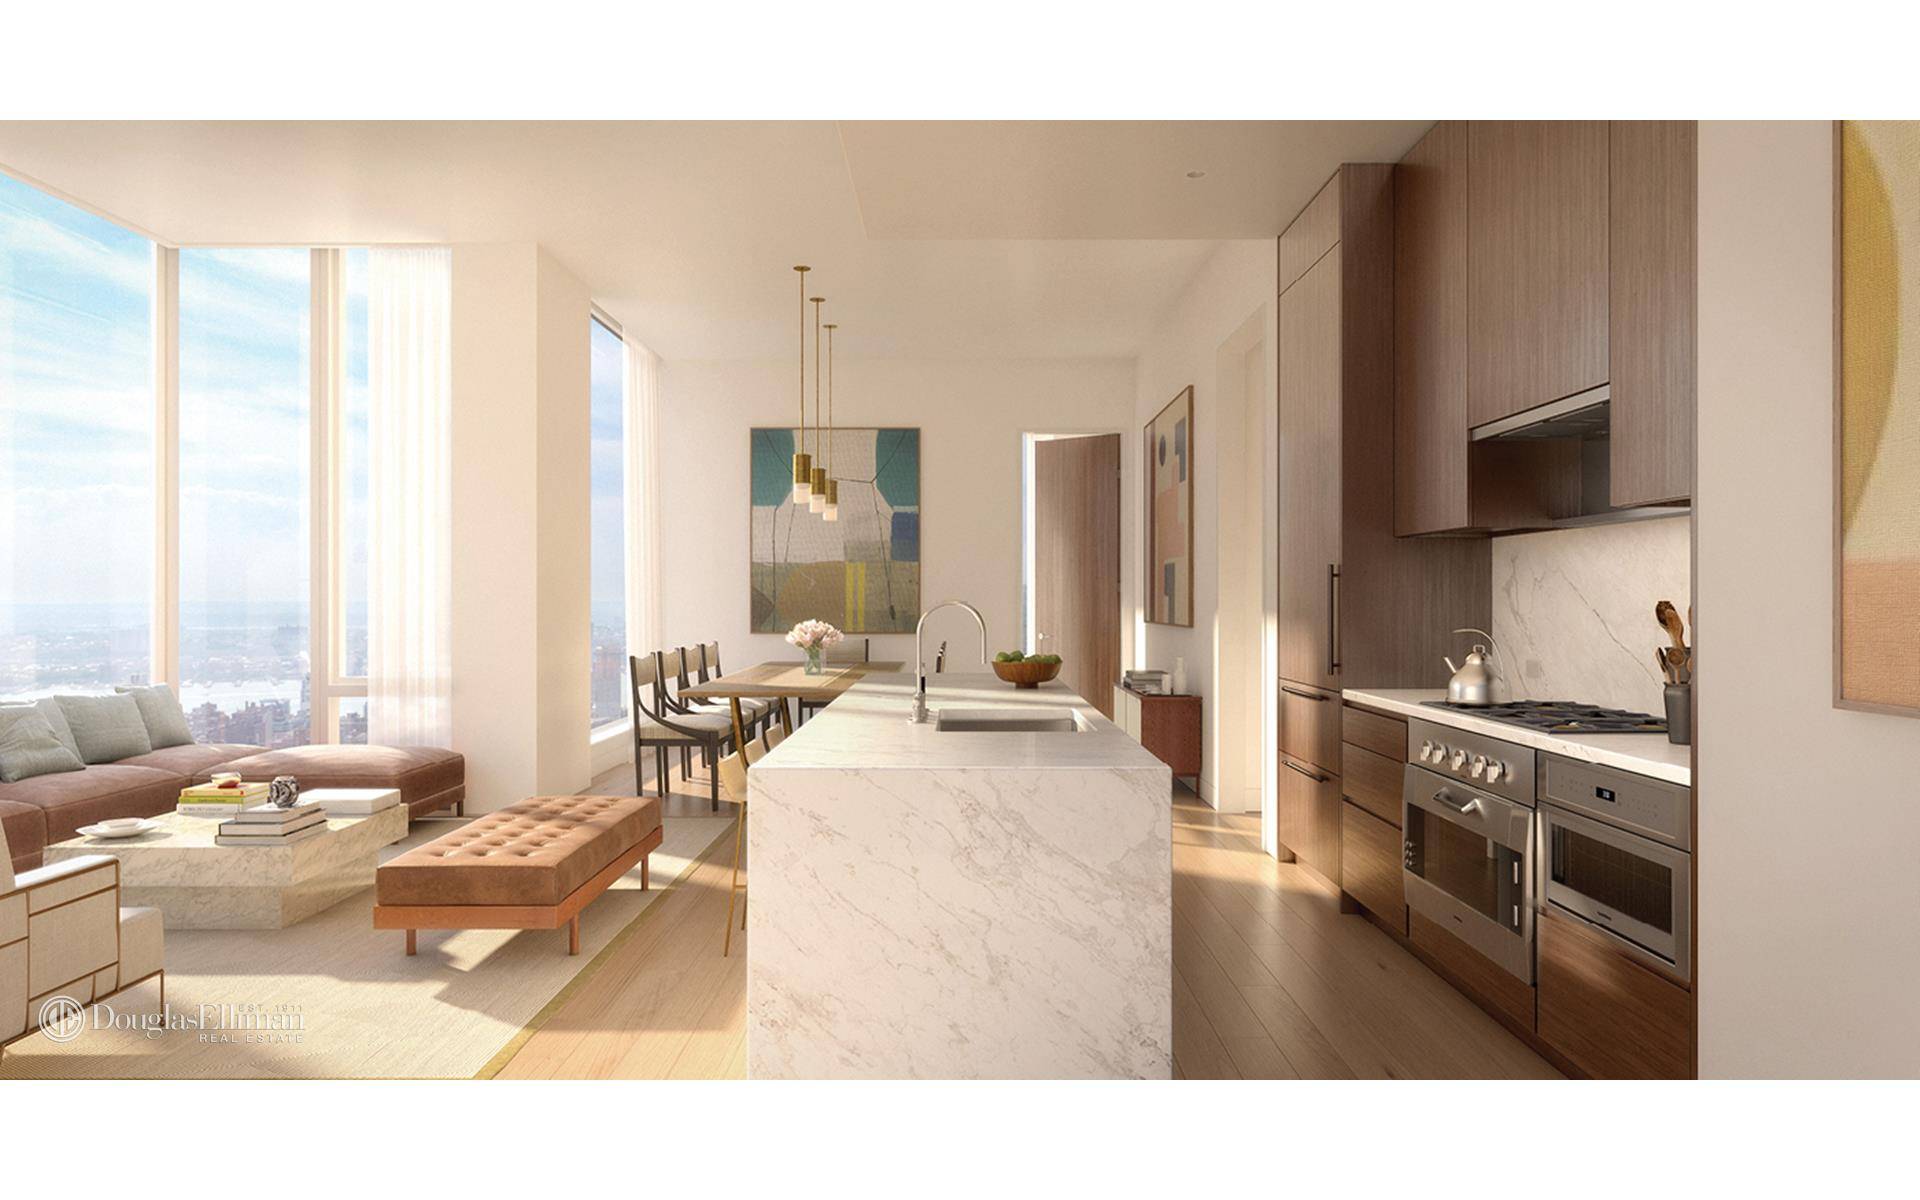 In the heart of stylish NoMad, Madison House offers unsurpassed panoramic views of New York City, where every residence has a corner window and 11 foot ceilings or higher.